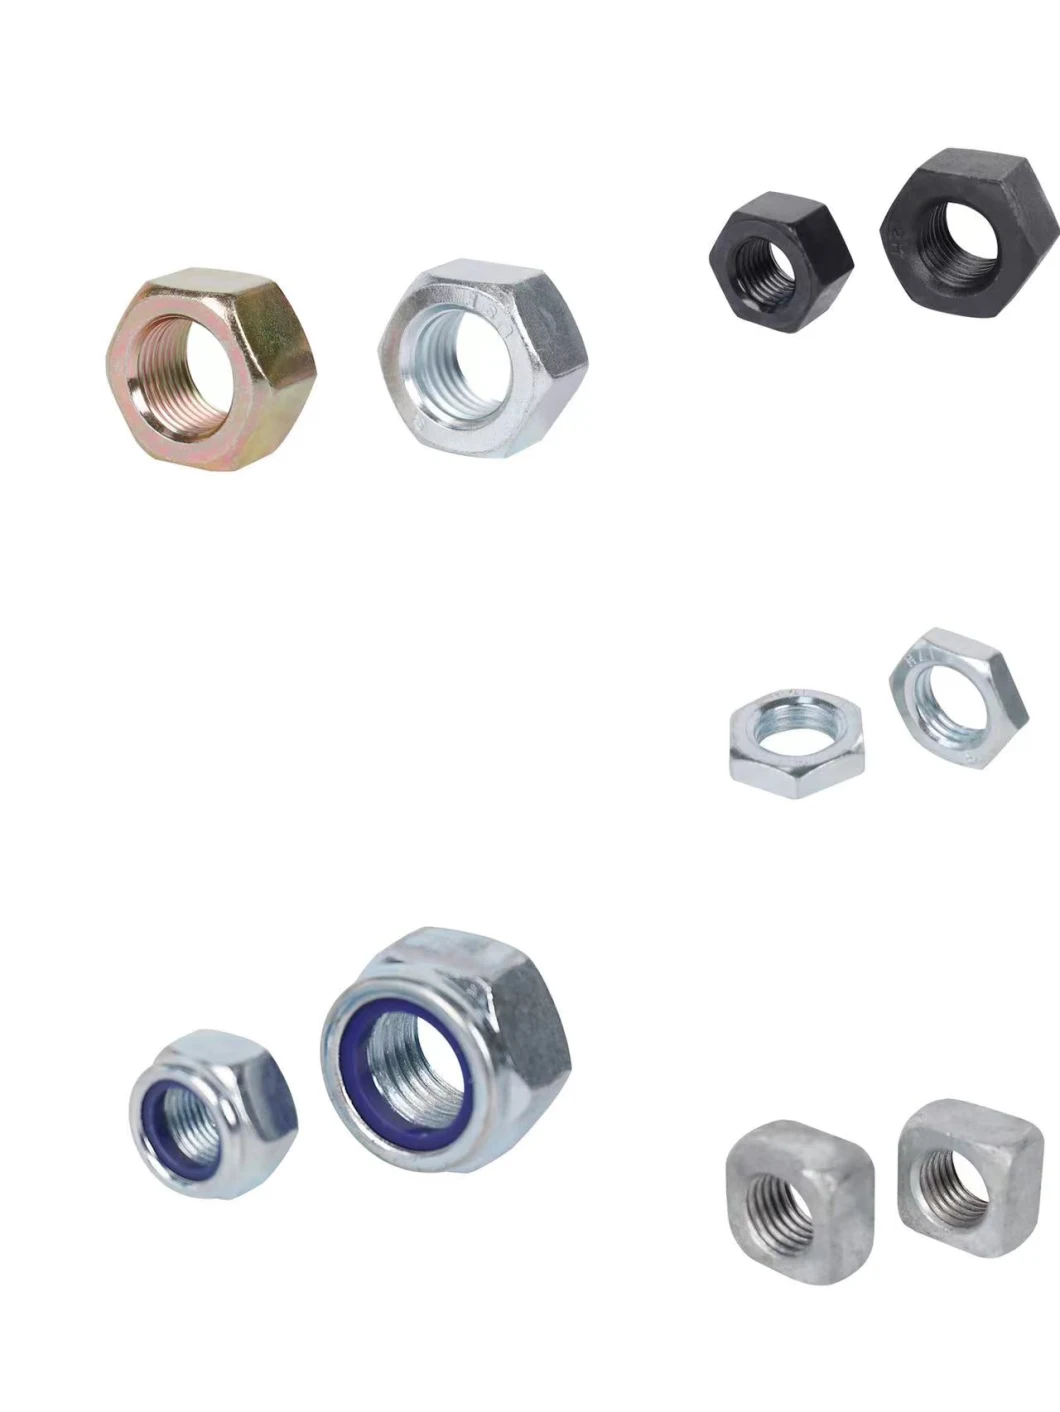 China Supplier Wholesale Customized Metric Serrated Titanium 12 Point Flange Bolt and Nut M6 M10 Hex Flange Bolt